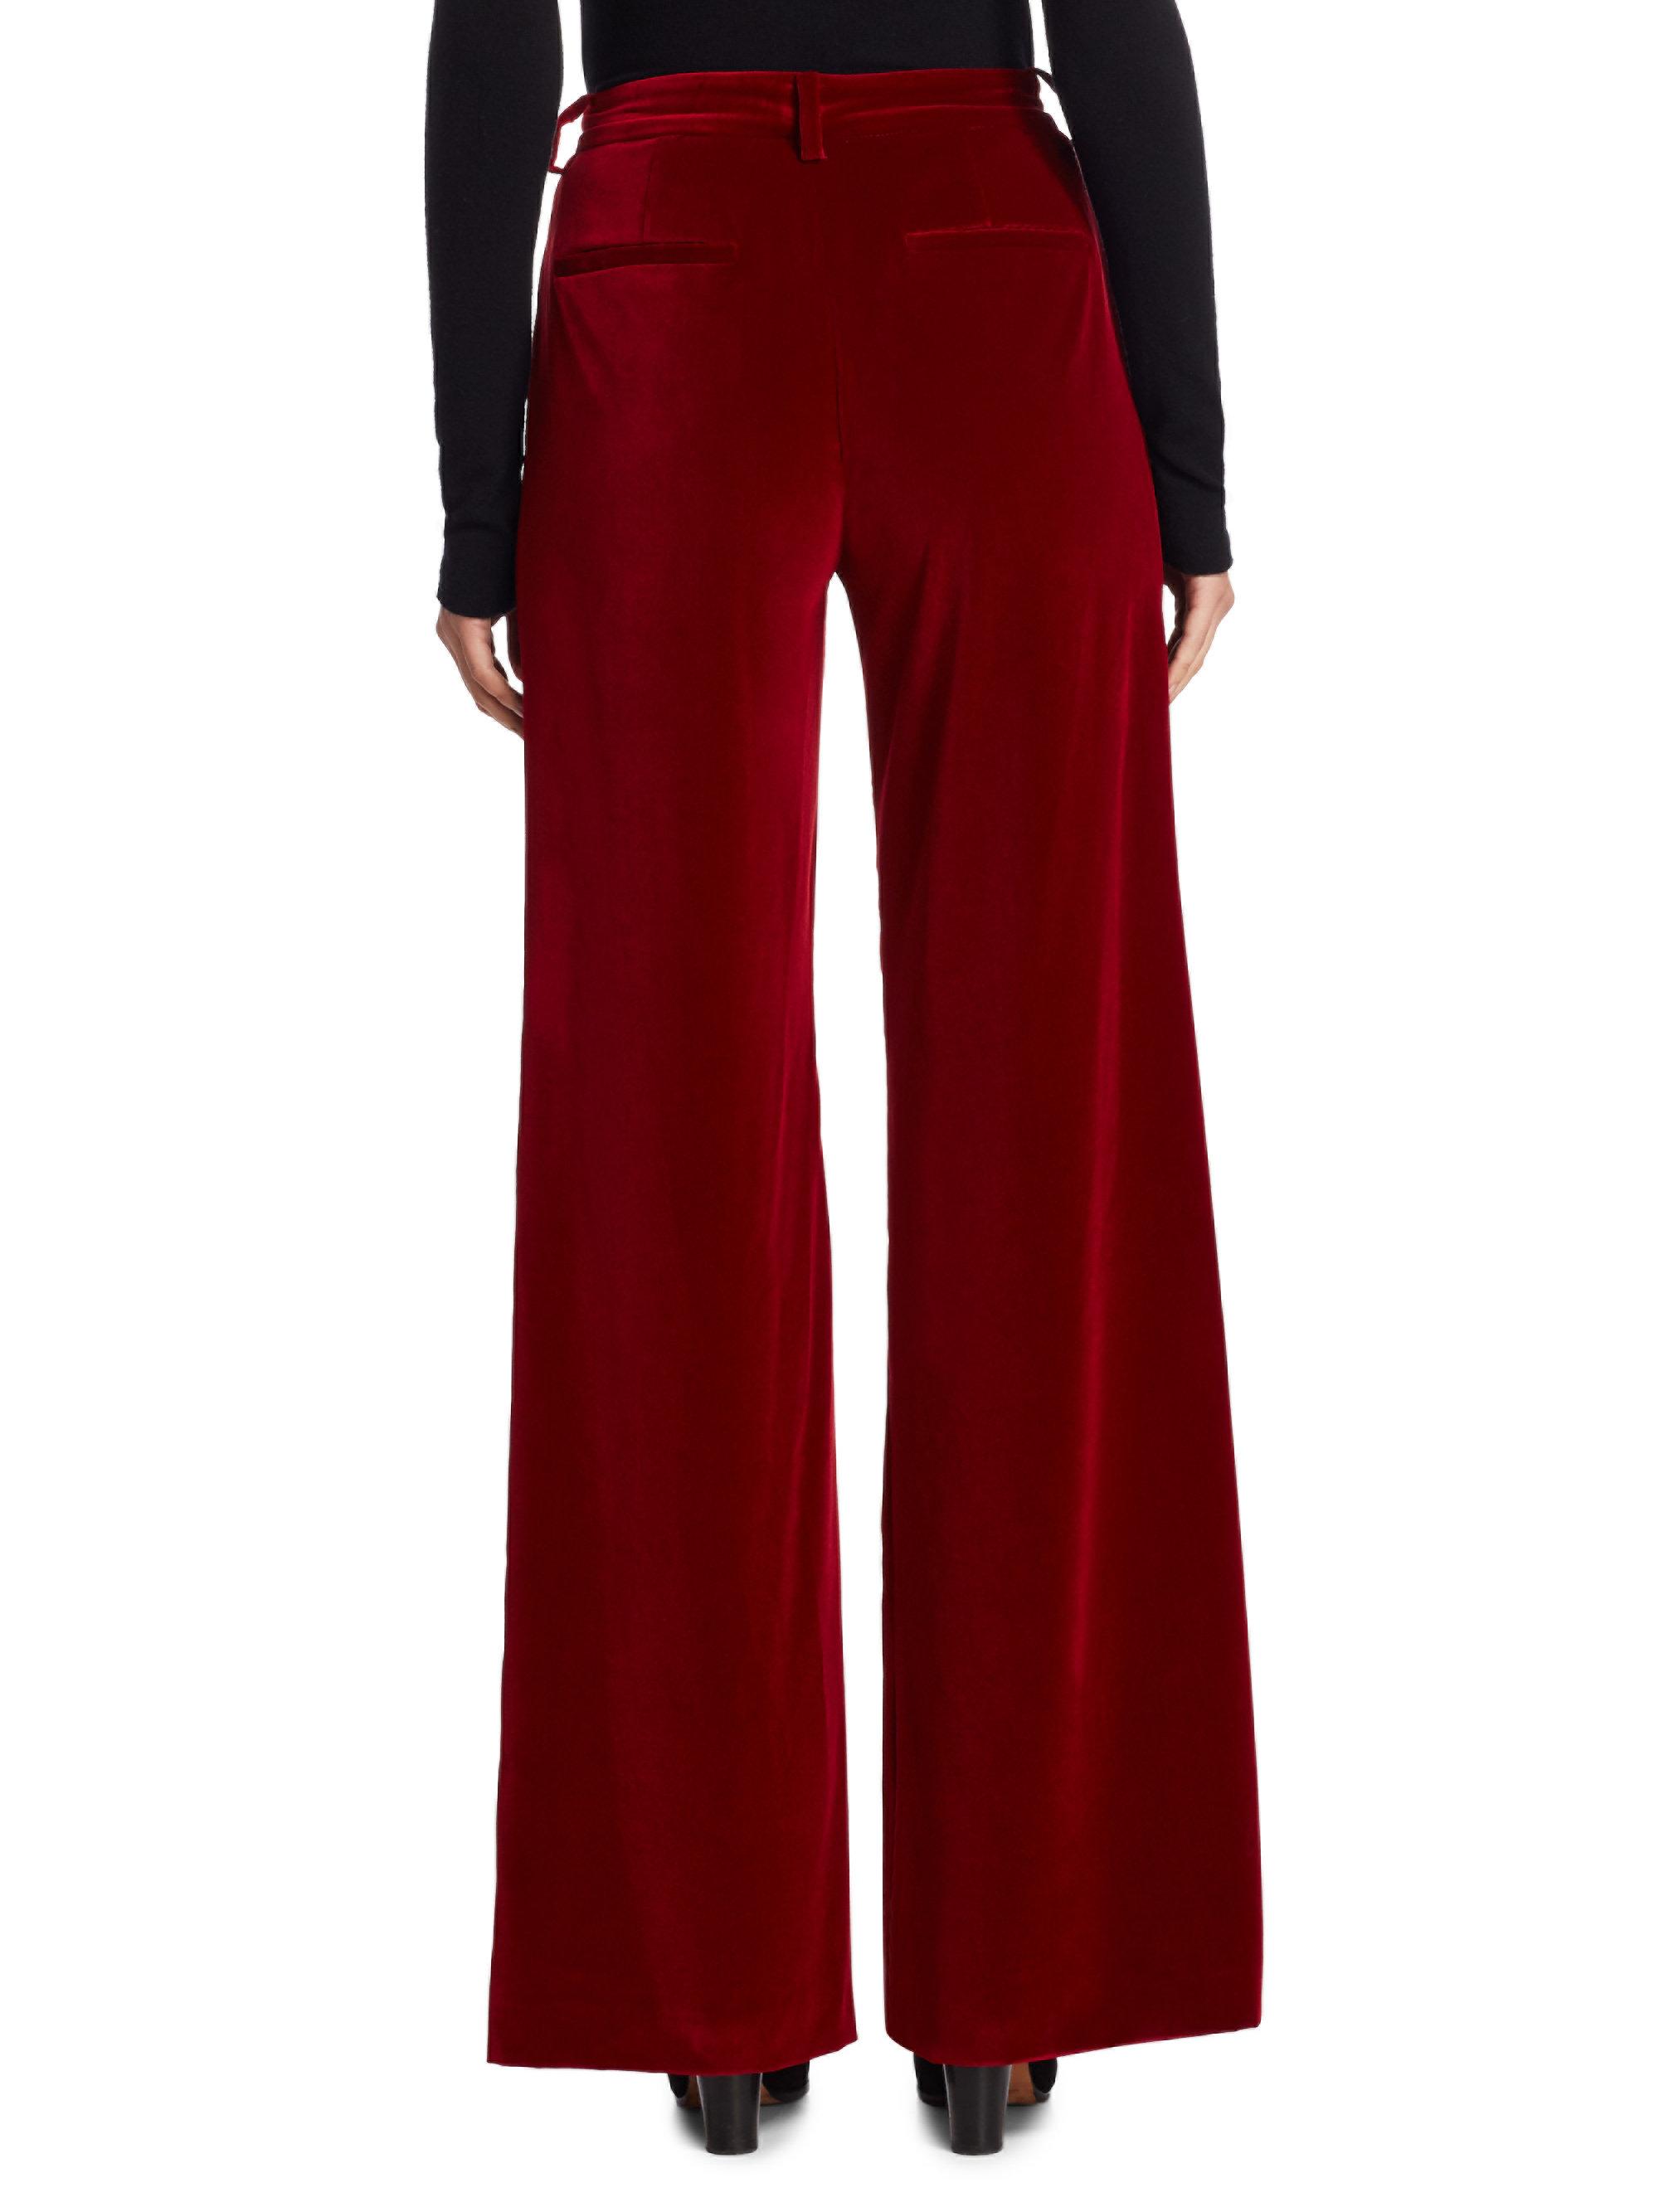 Alice + Olivia Synthetic Paulette High-rise Tuxedo Pant in Deep Ruby ...